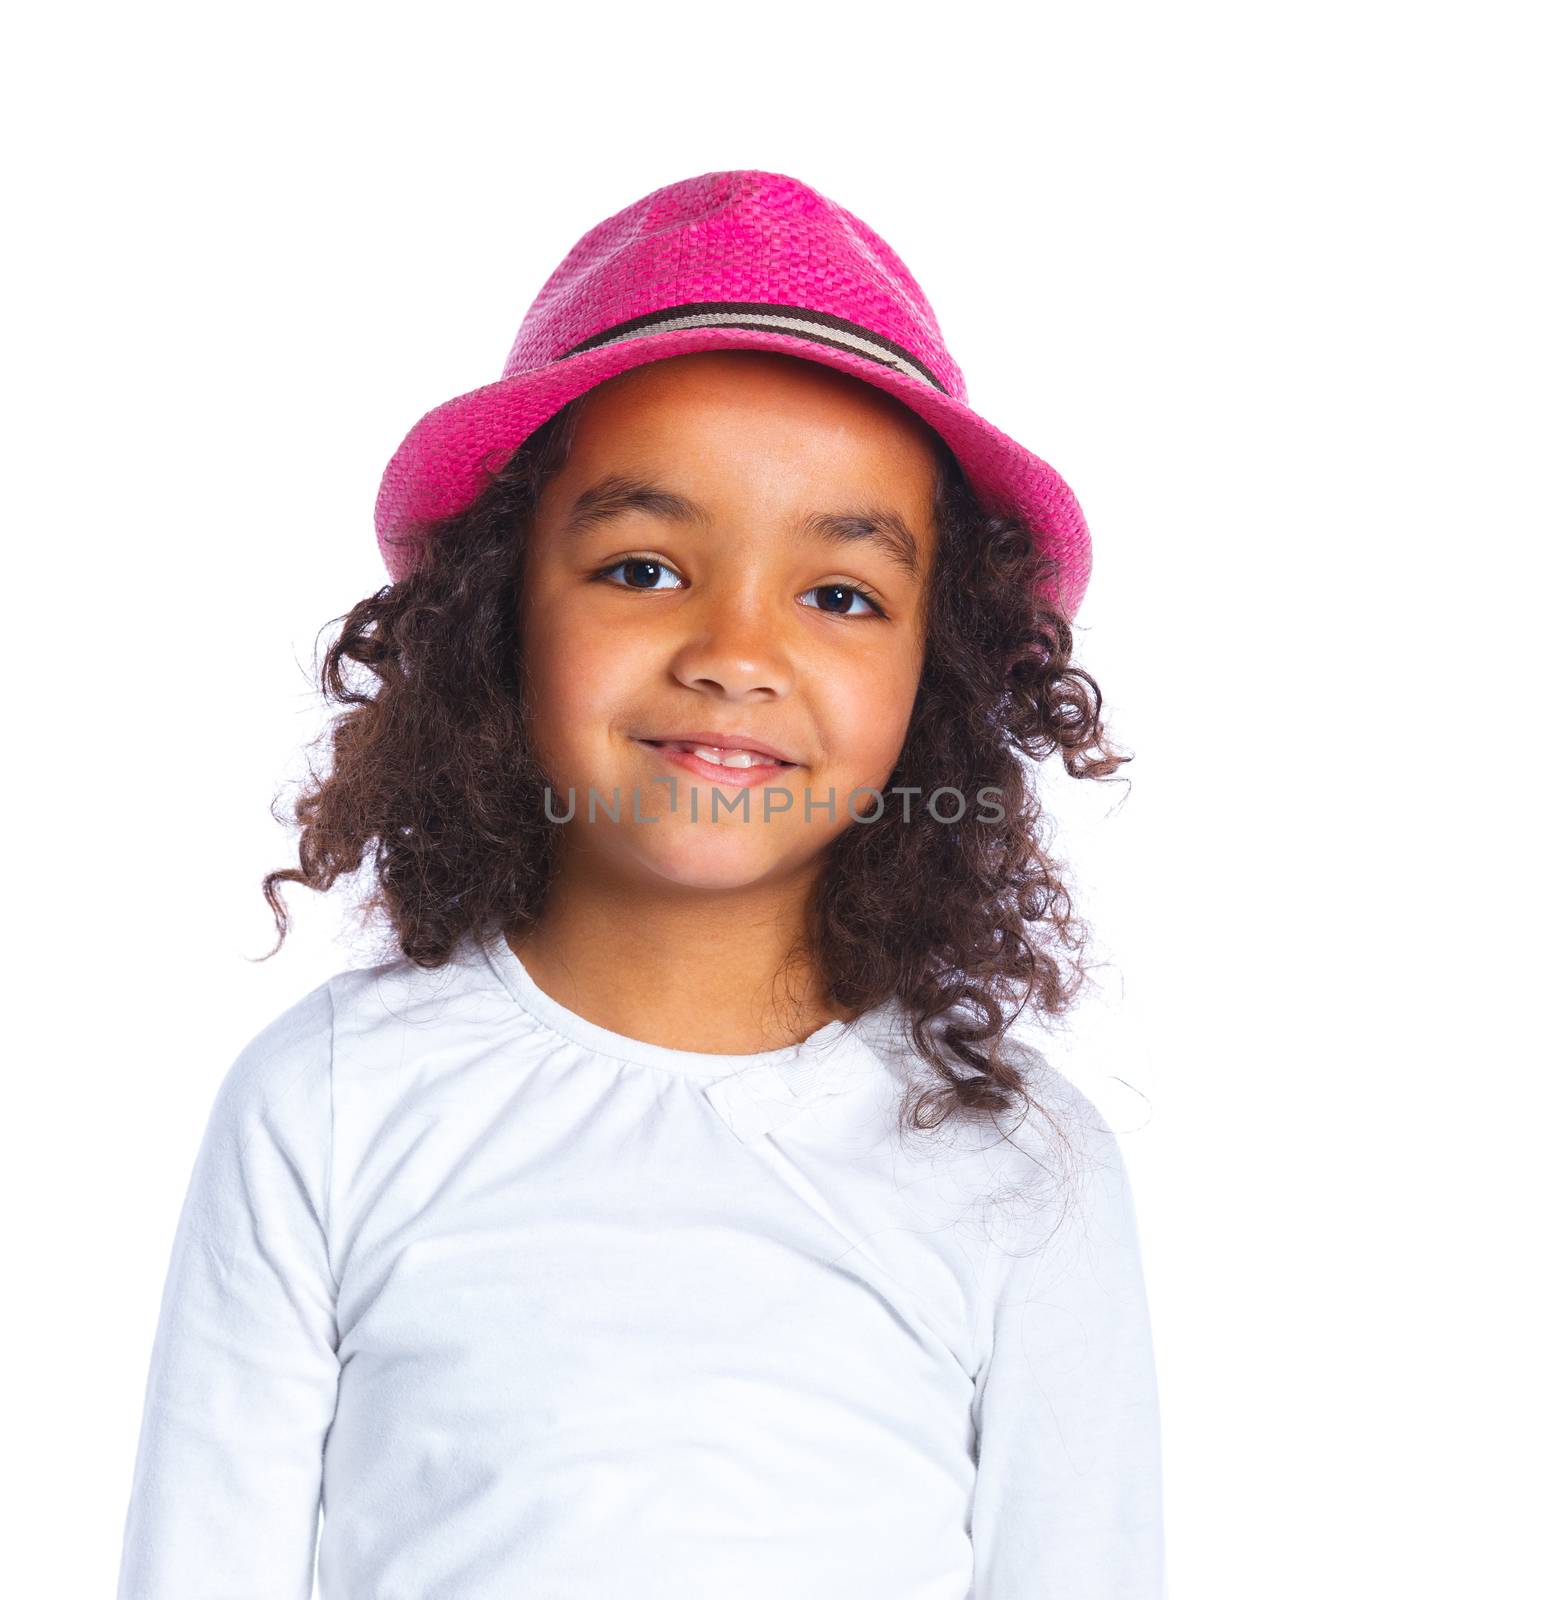 Closeup portrait of a pretty mulatto girl in pink hat smiling at camera on white background